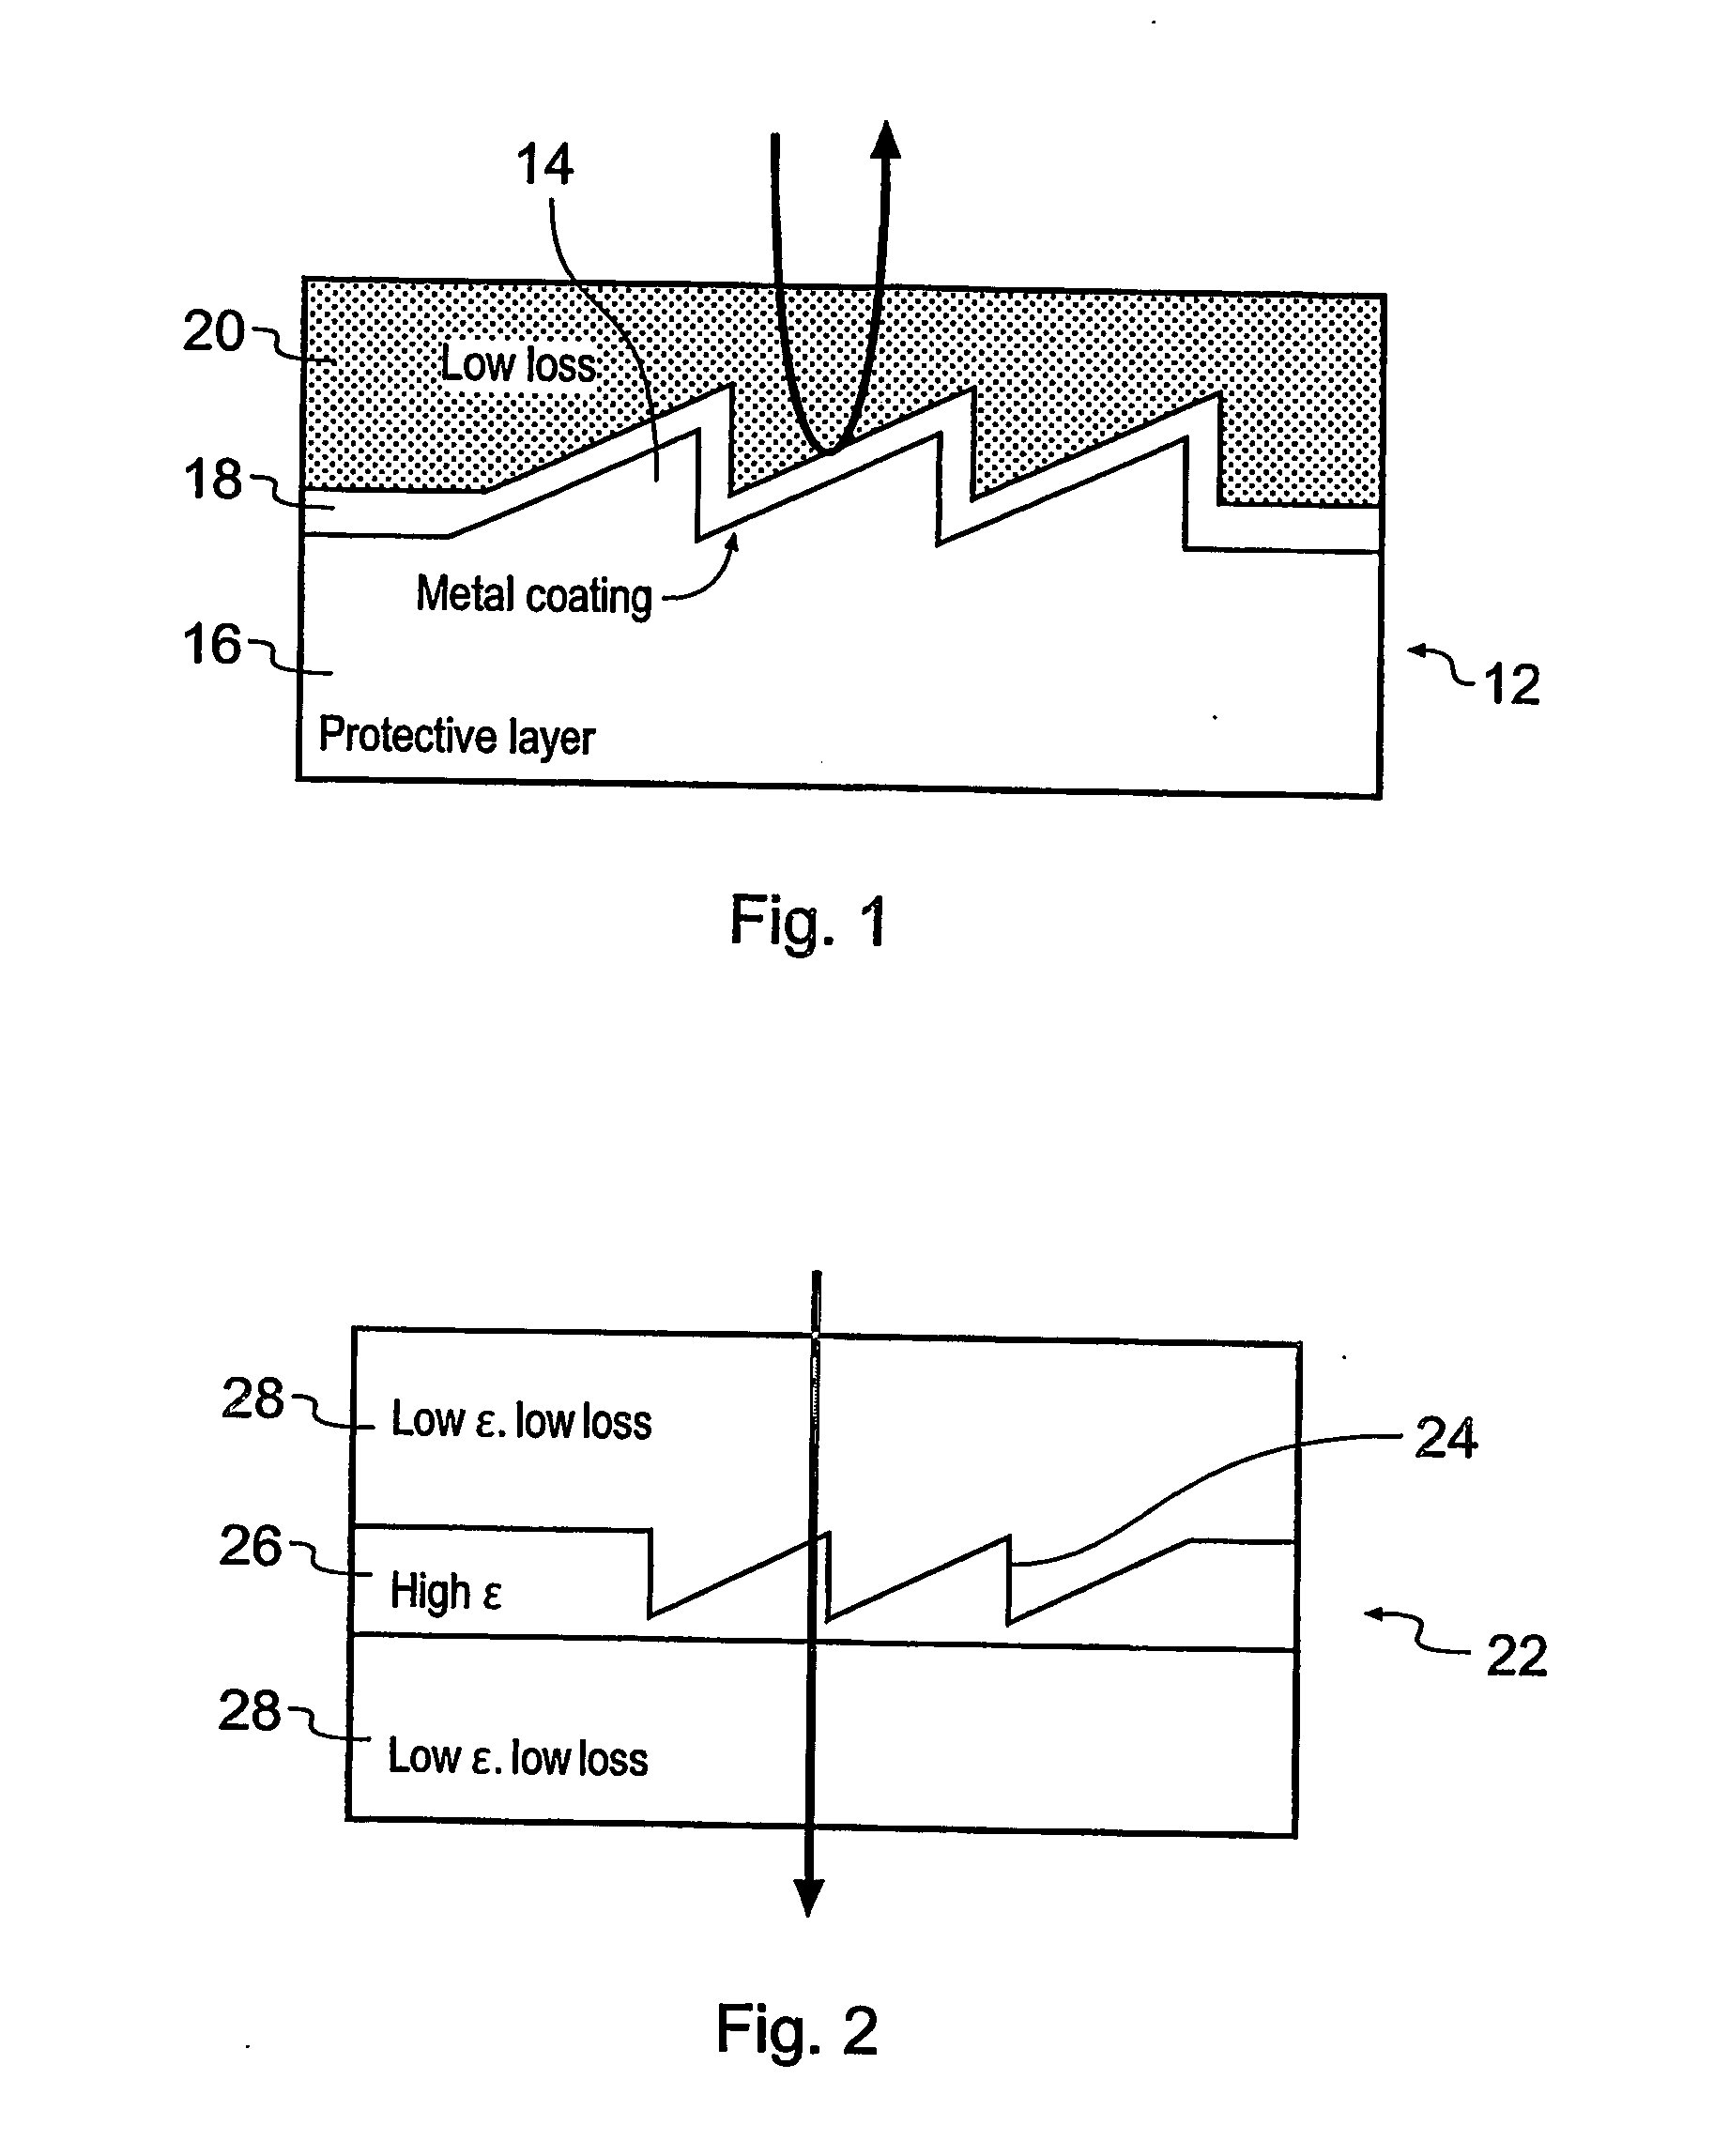 Security label which is optically read by terahertz radiation